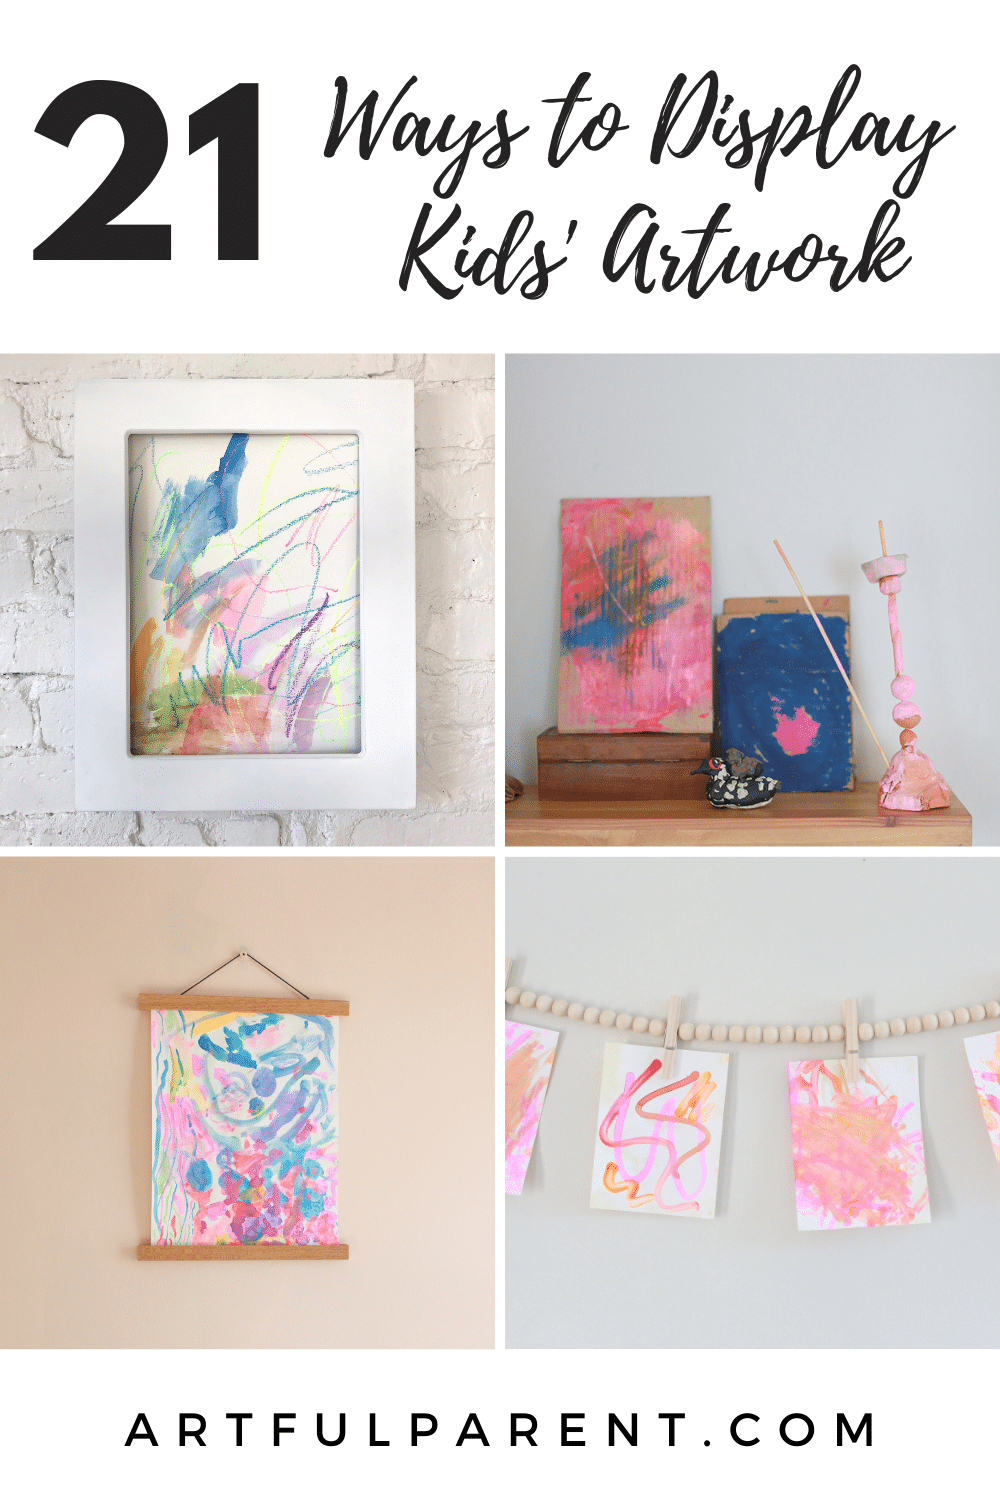 21 Kids' Art Display Ideas for Your Home